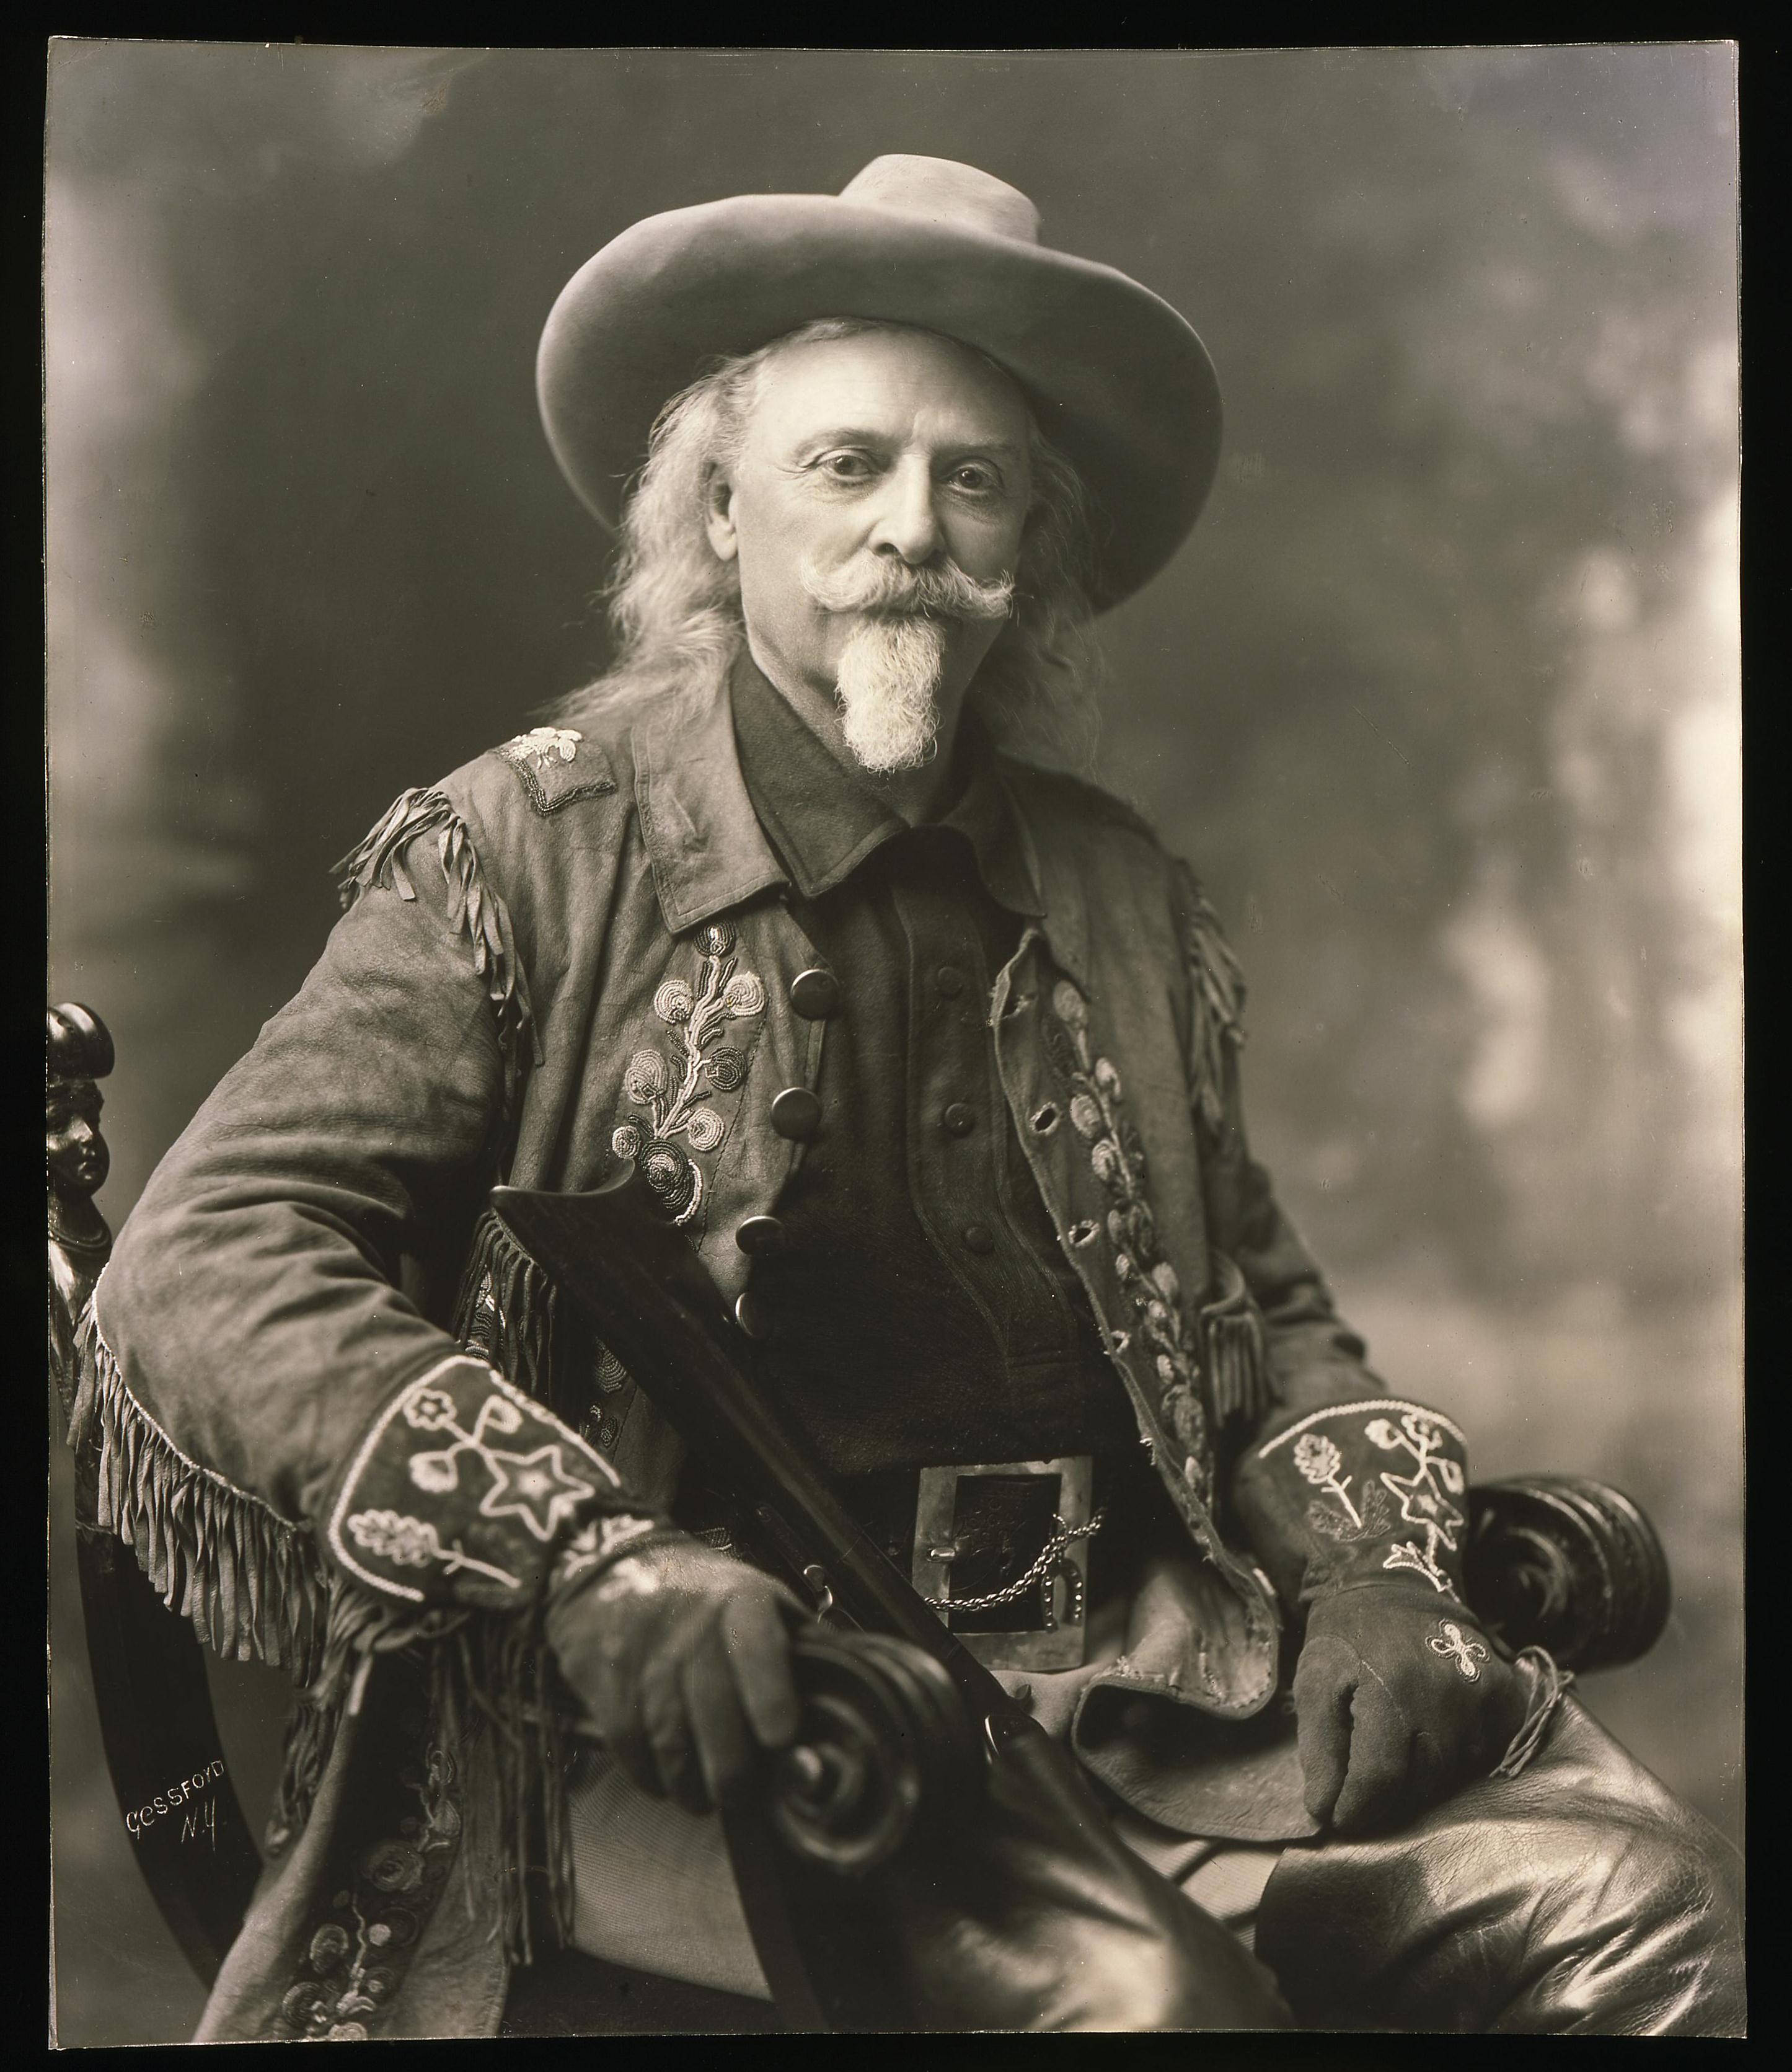 William F. Cody in one of his Wild West show jackets, May 1909